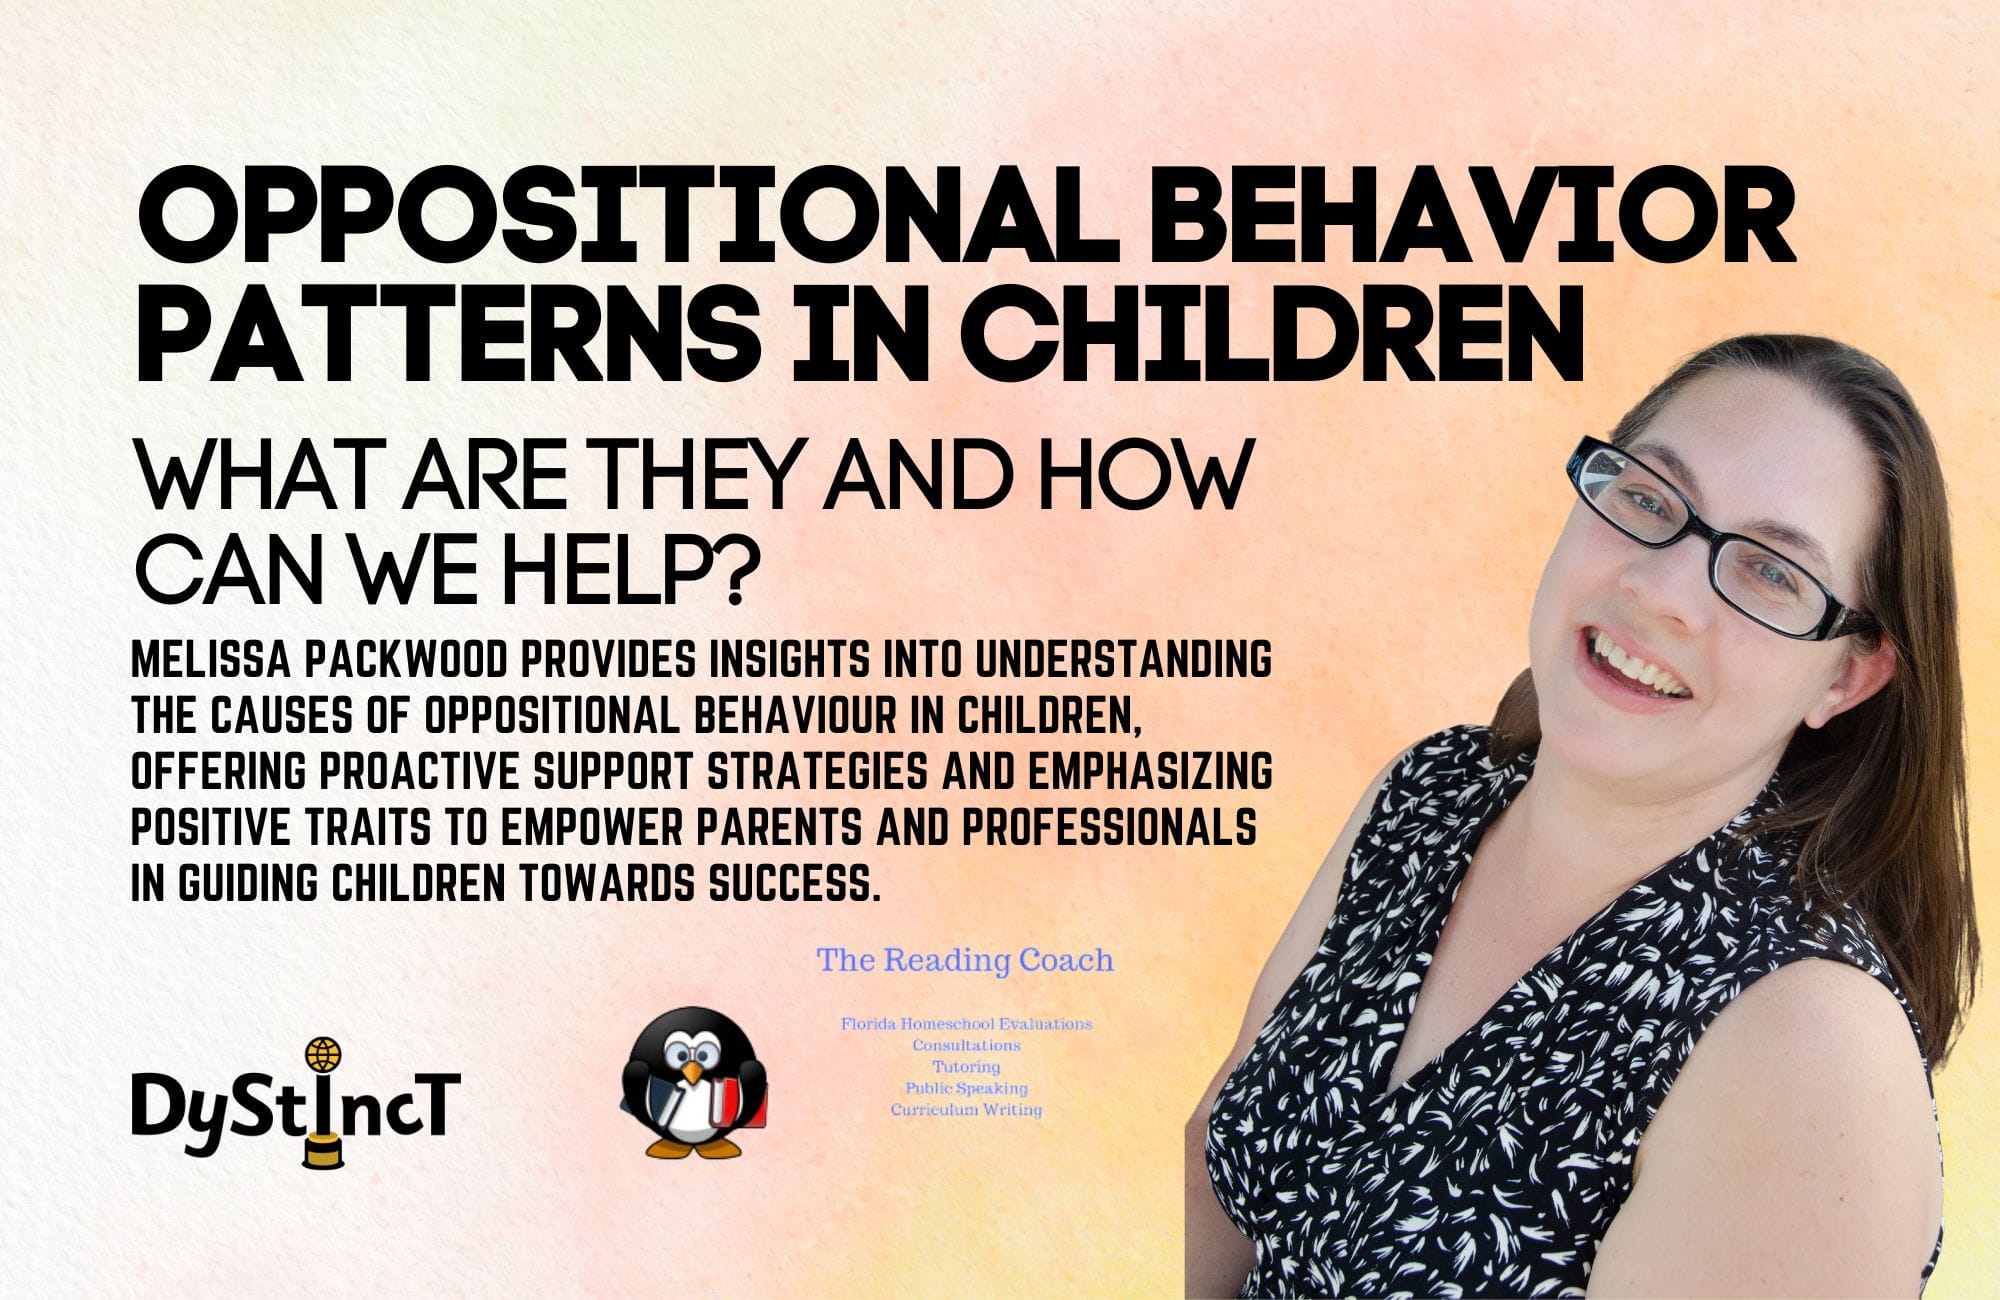 Issue 20: Oppositional Behavior Patterns in Children: What Are They and How Can We Help? Melissa Packwood